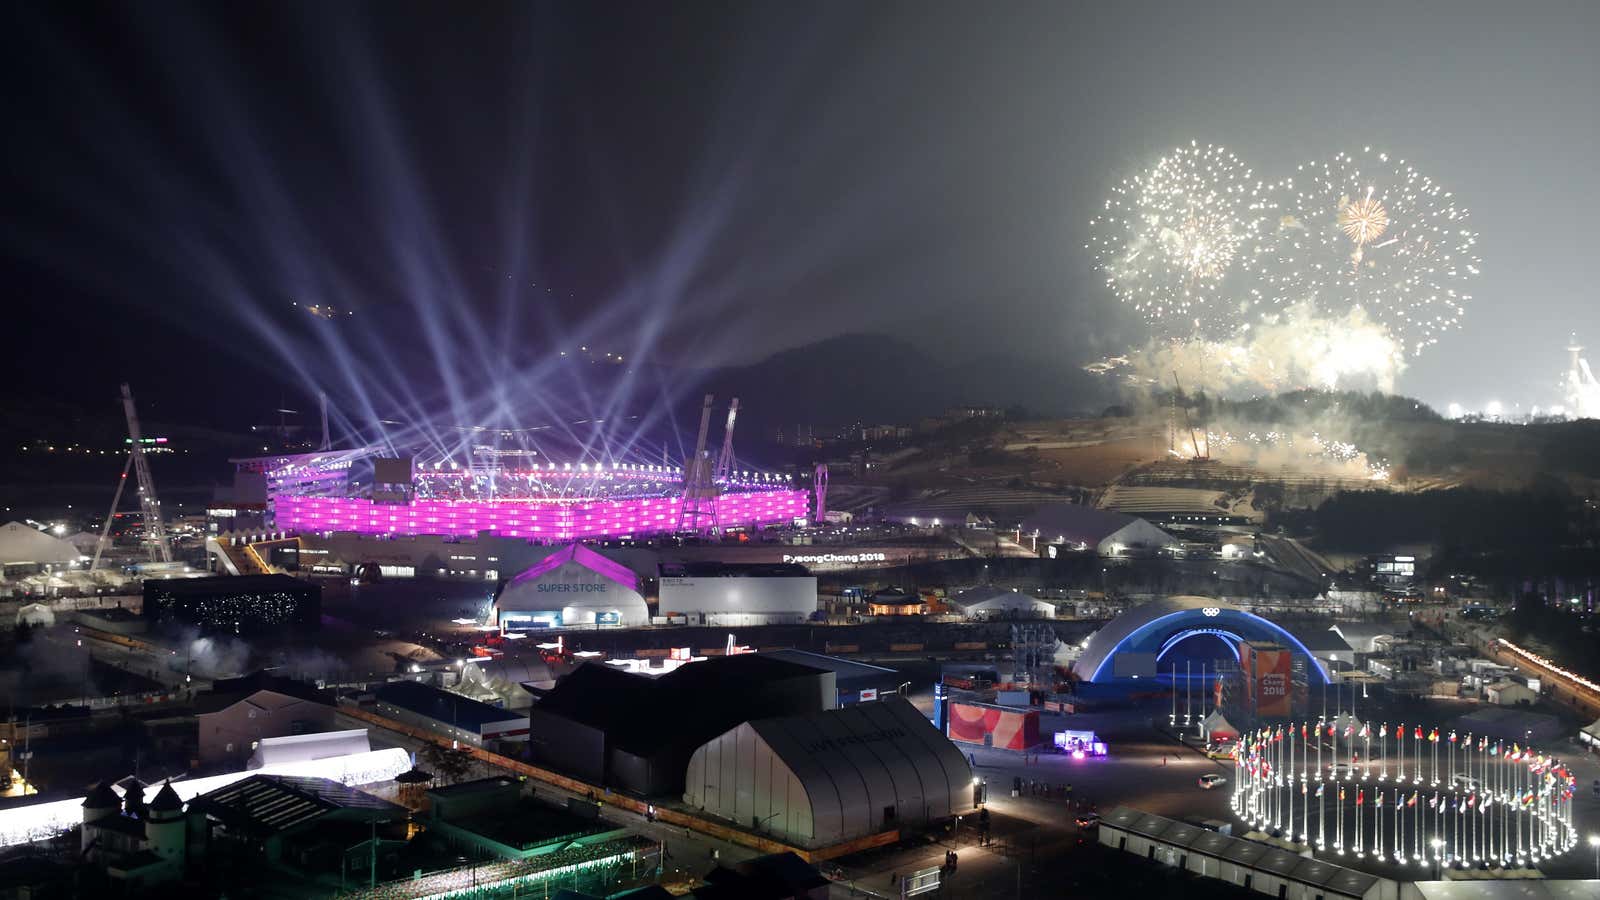 Fireworks over the Pyeongchang Olympic Stadium in South Korea.